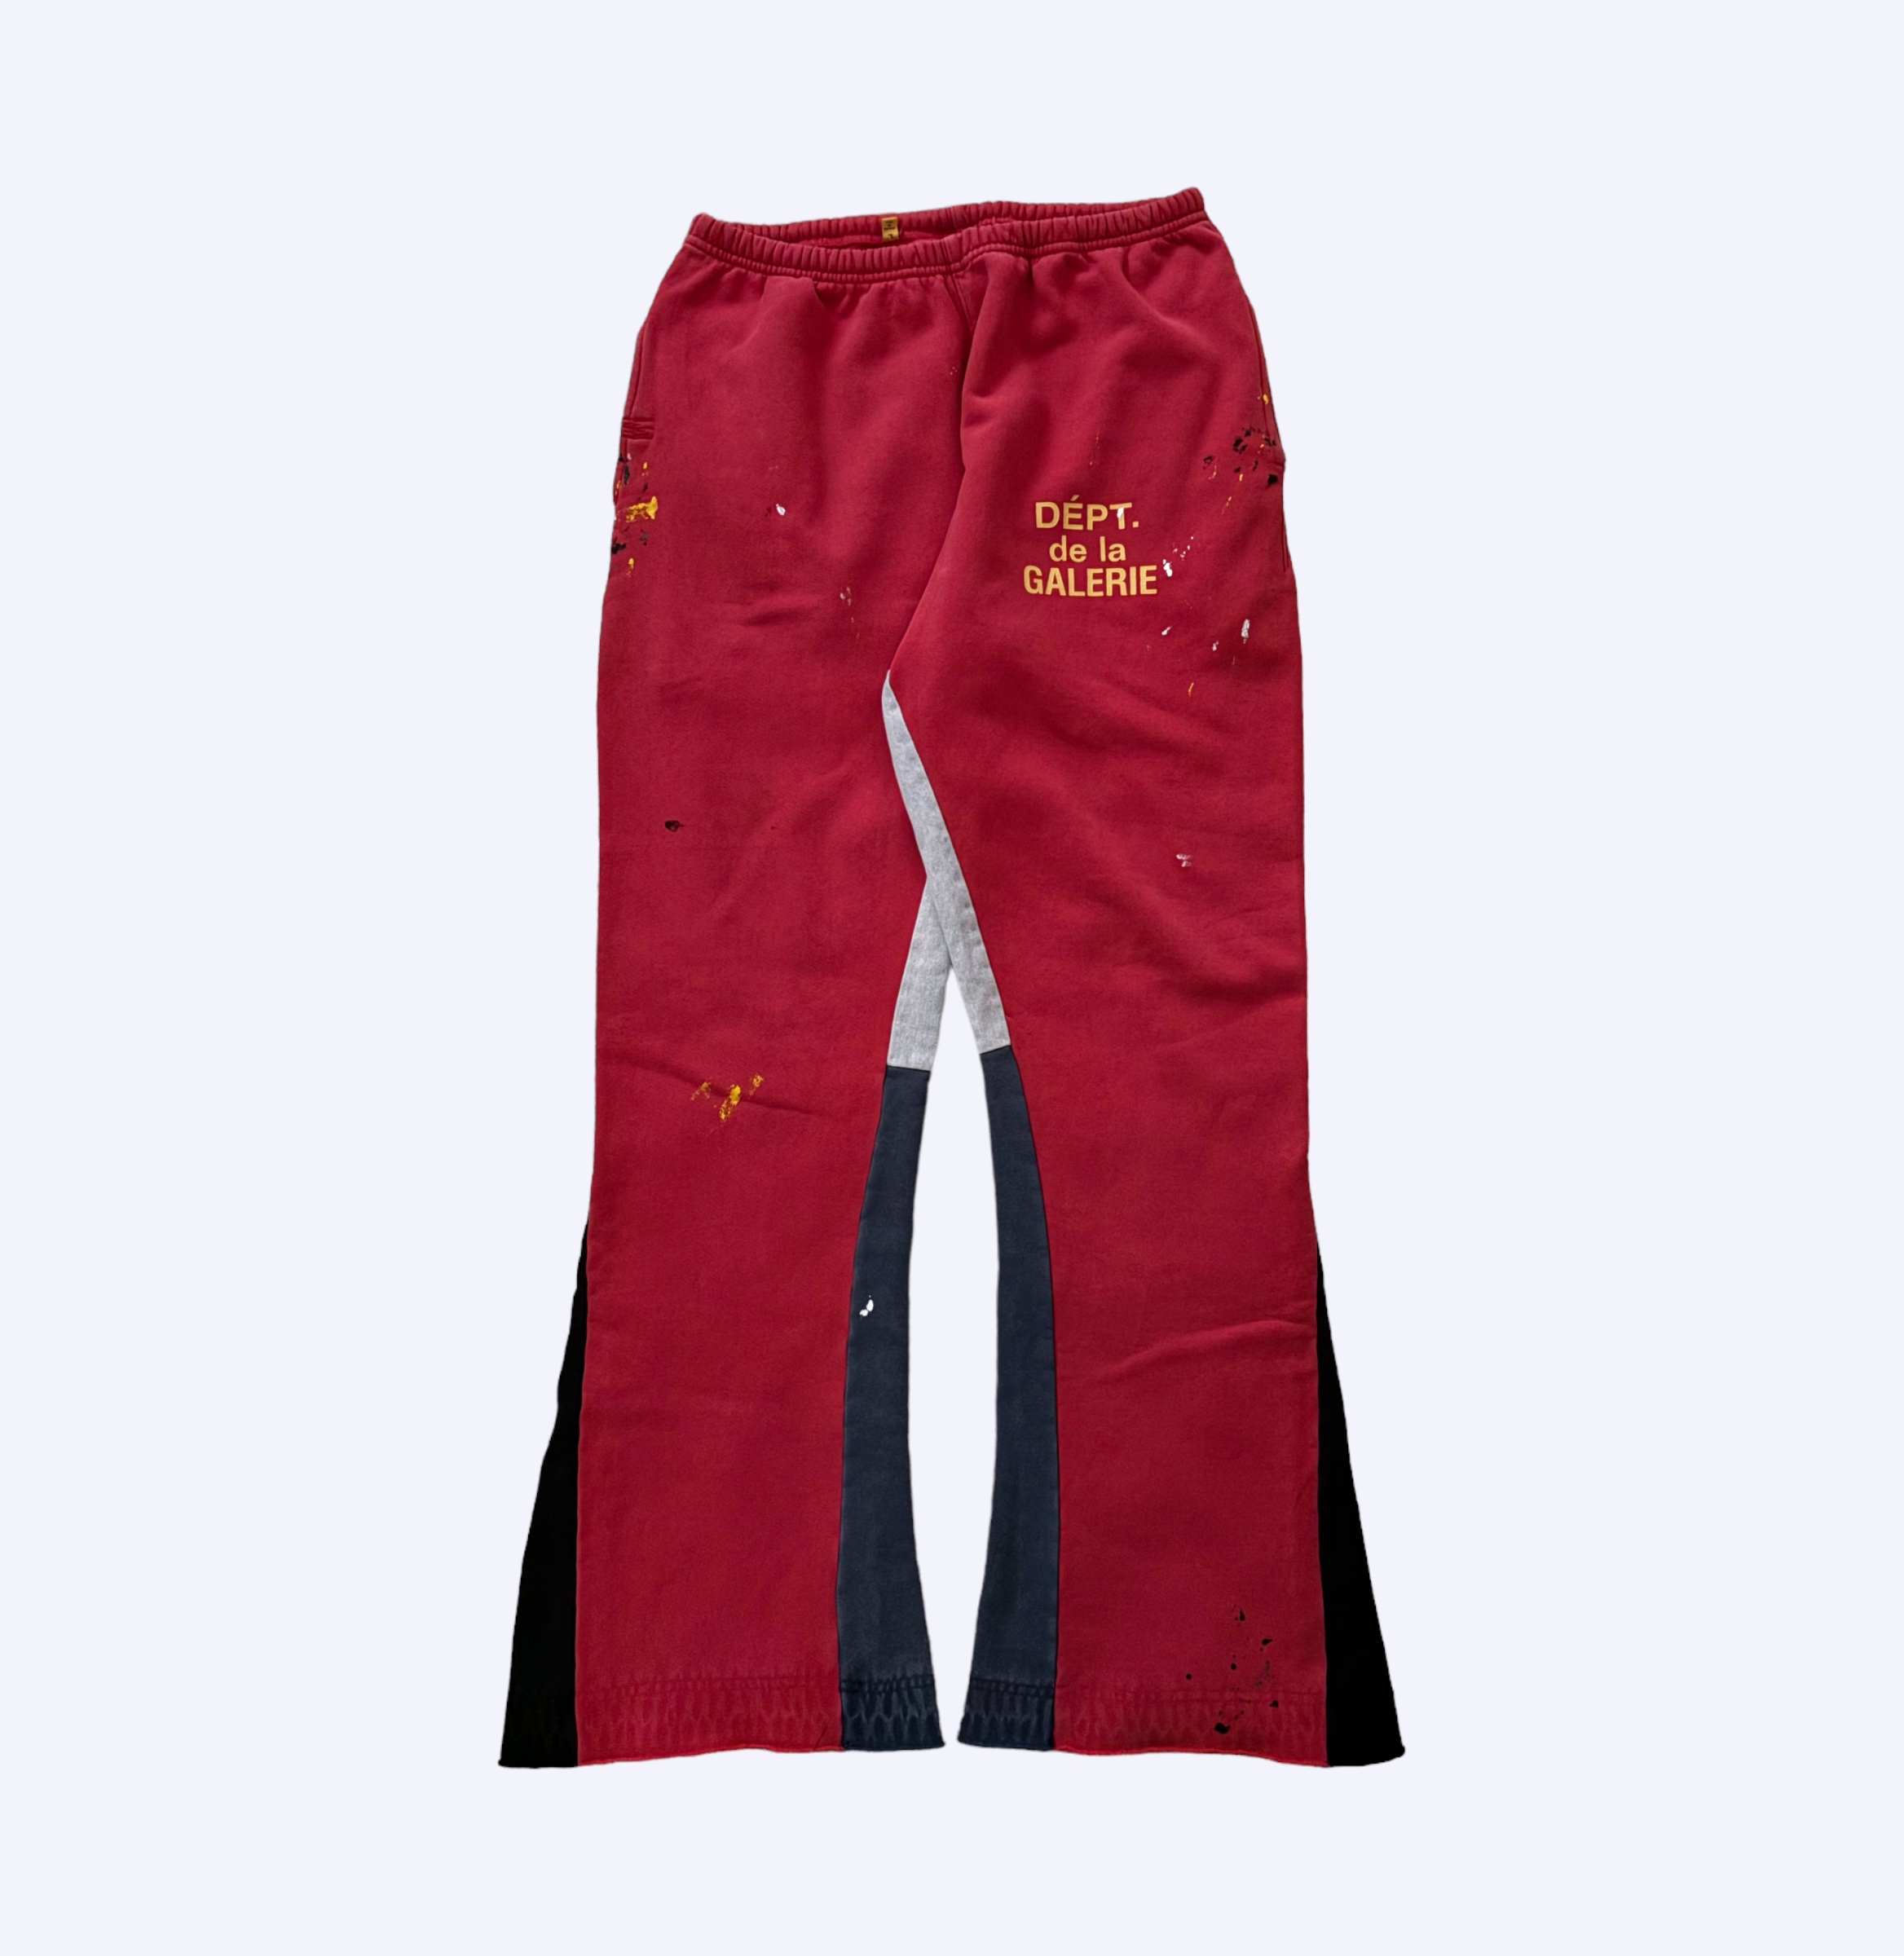 Gallery Dept. Rare Red Flare Sweats